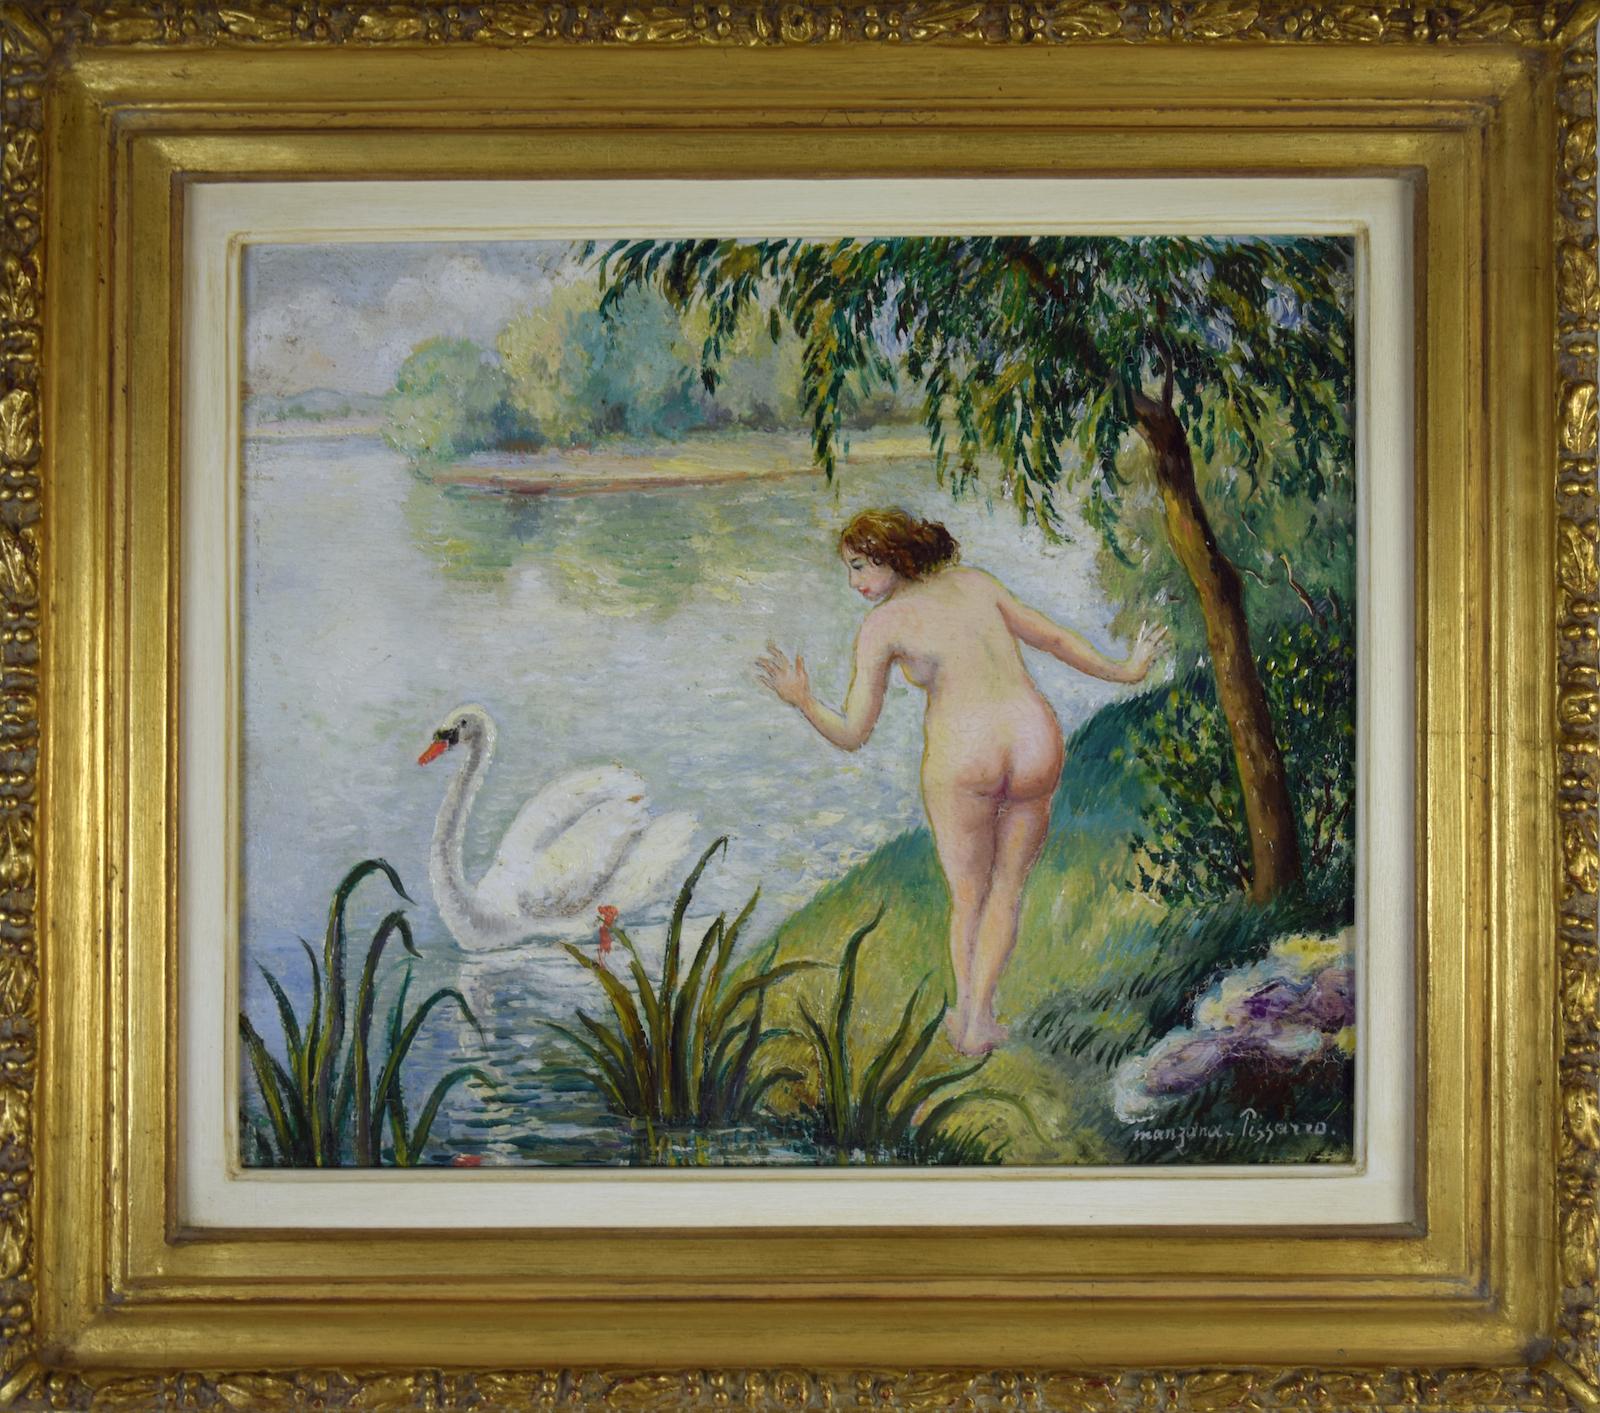 Baigneuses avec cygne by Georges Manzana Pissarro - Nude oil painting - Painting by Georges Henri Manzana Pissarro